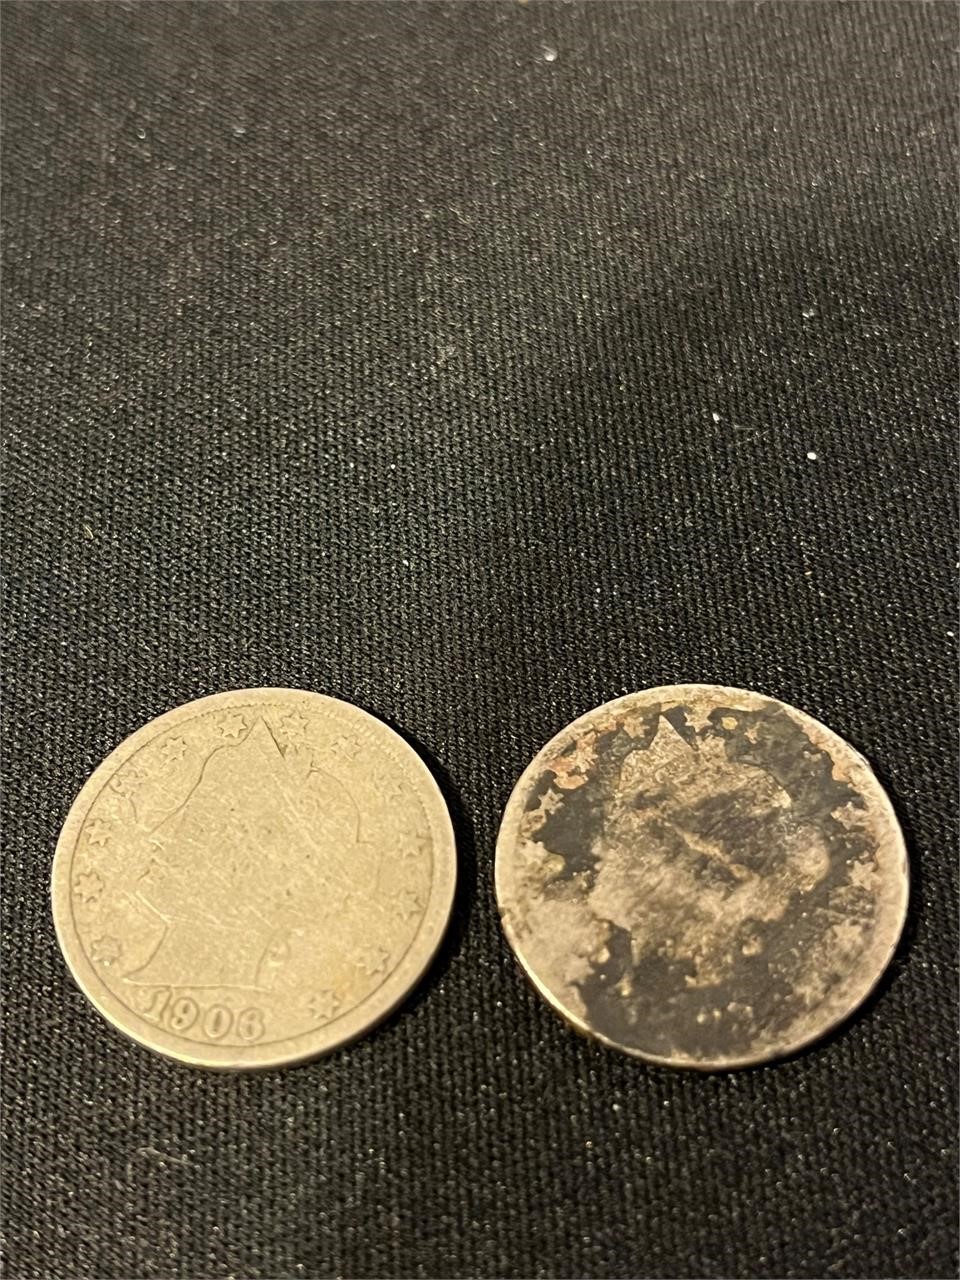 1903 and 1906 Liberty Head Nickels